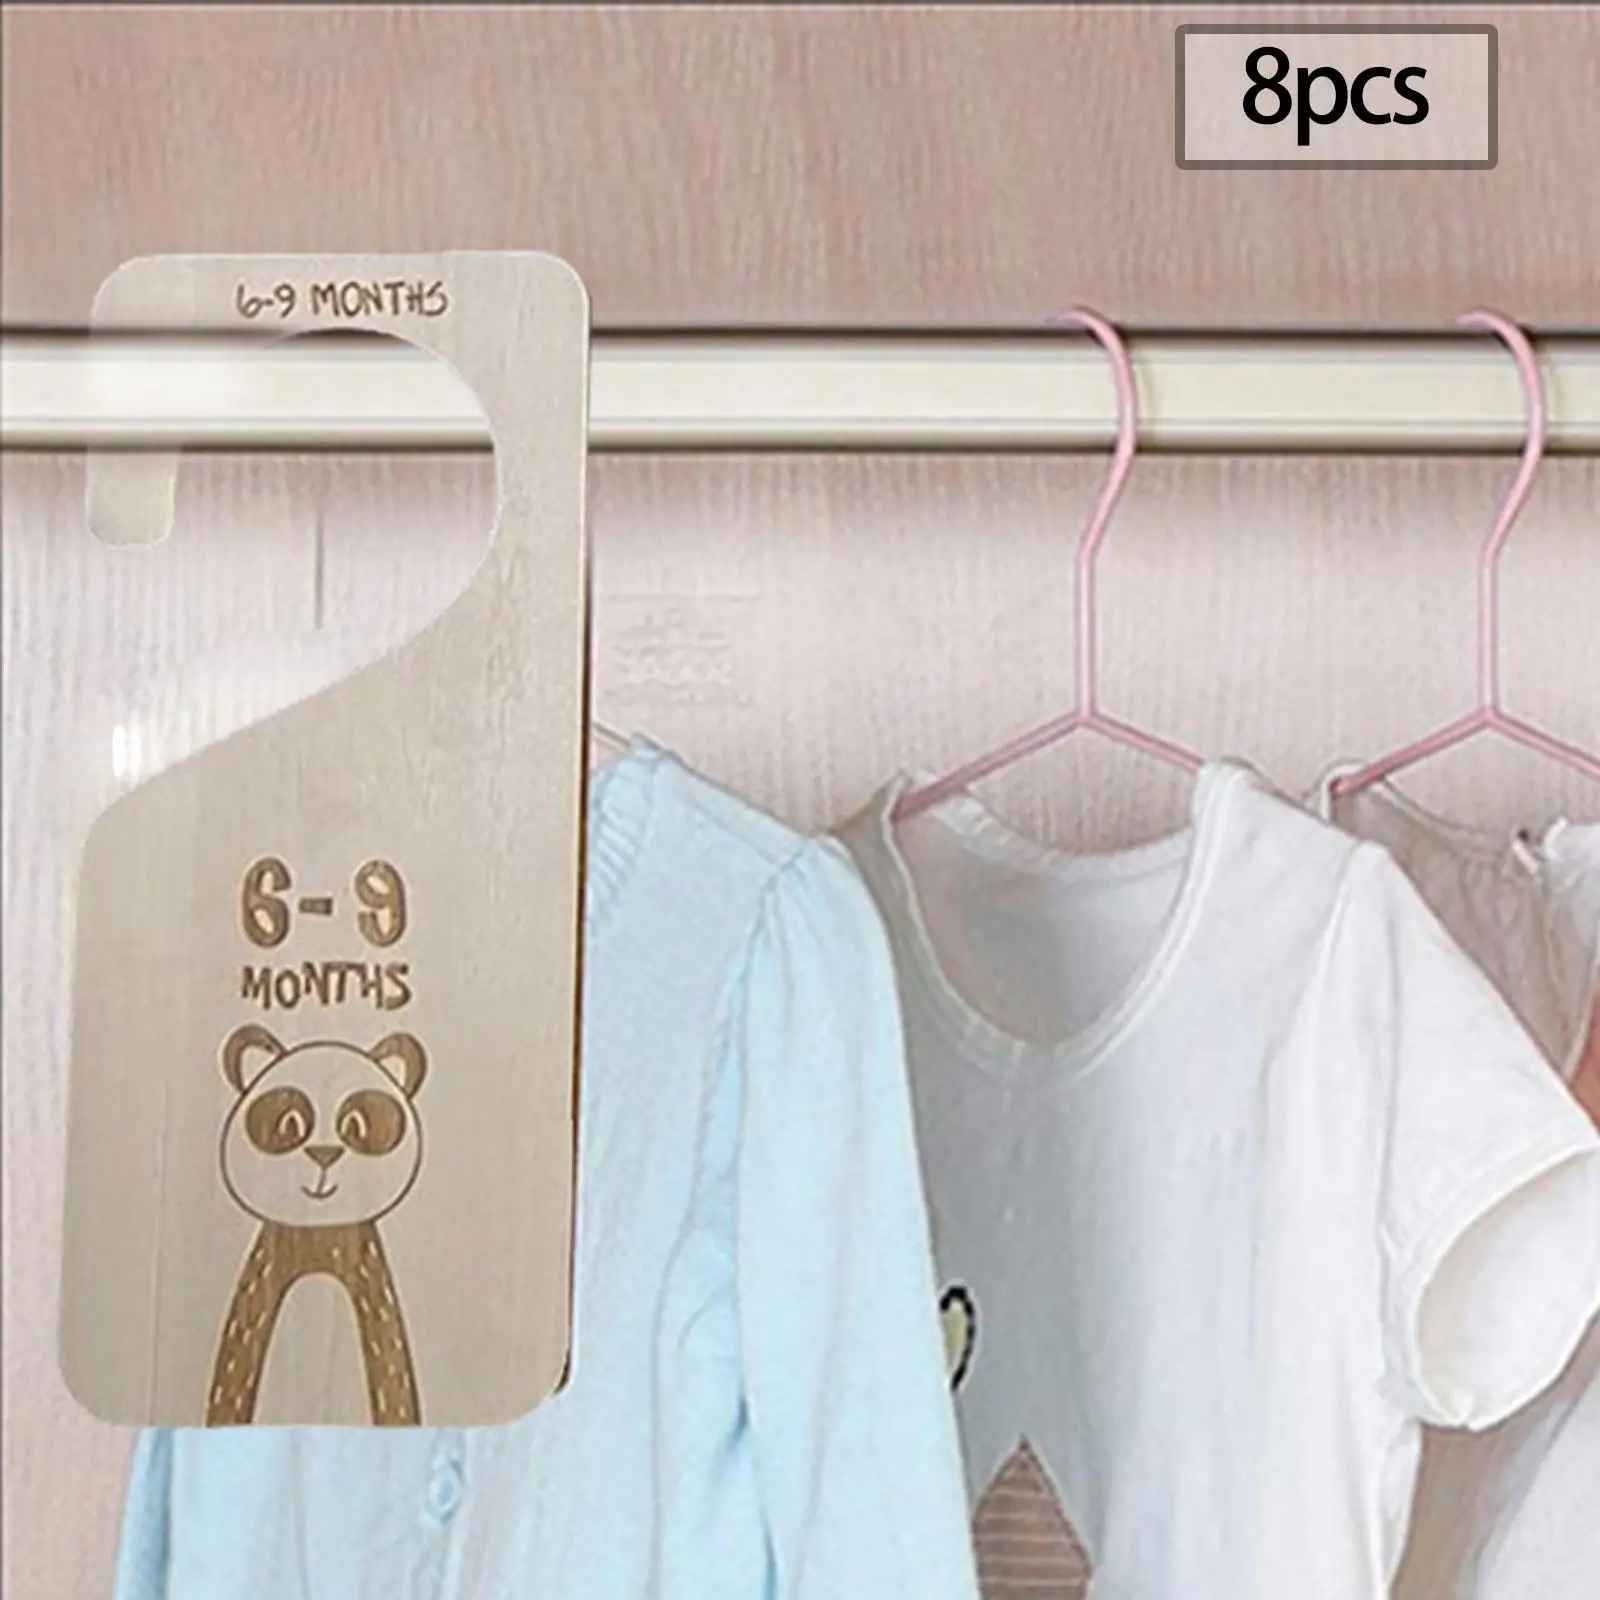 7x Adorable Newborn Baby Toddler Clothes Dividers Organizer for Daily Use